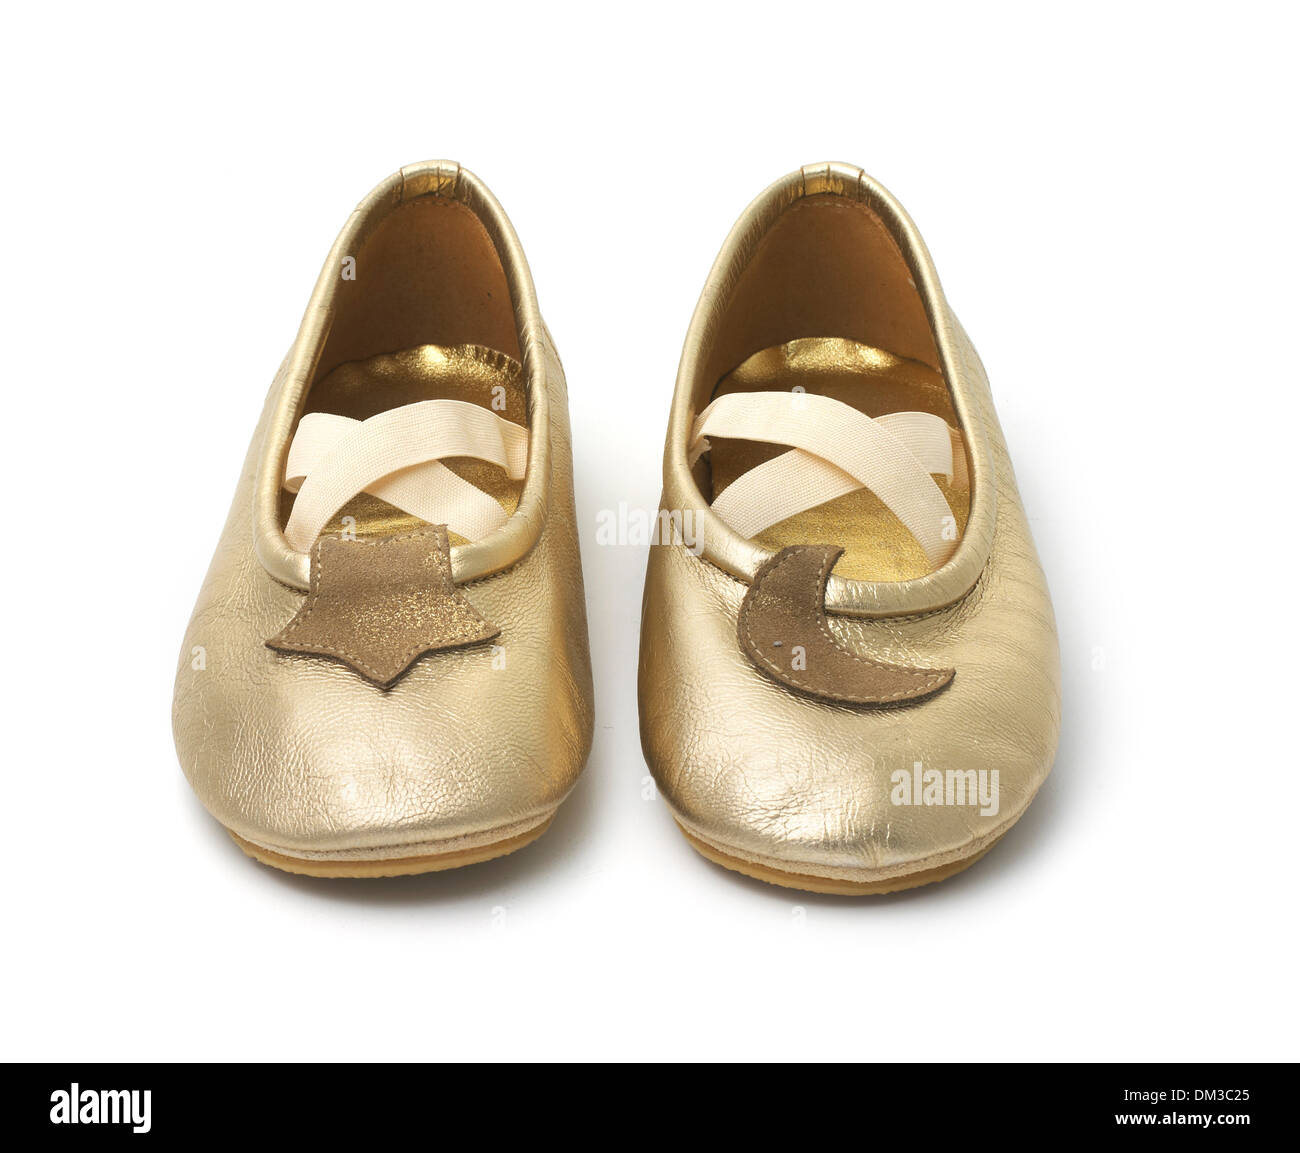 Gold ballet pumps, cut out on white background Stock Photo